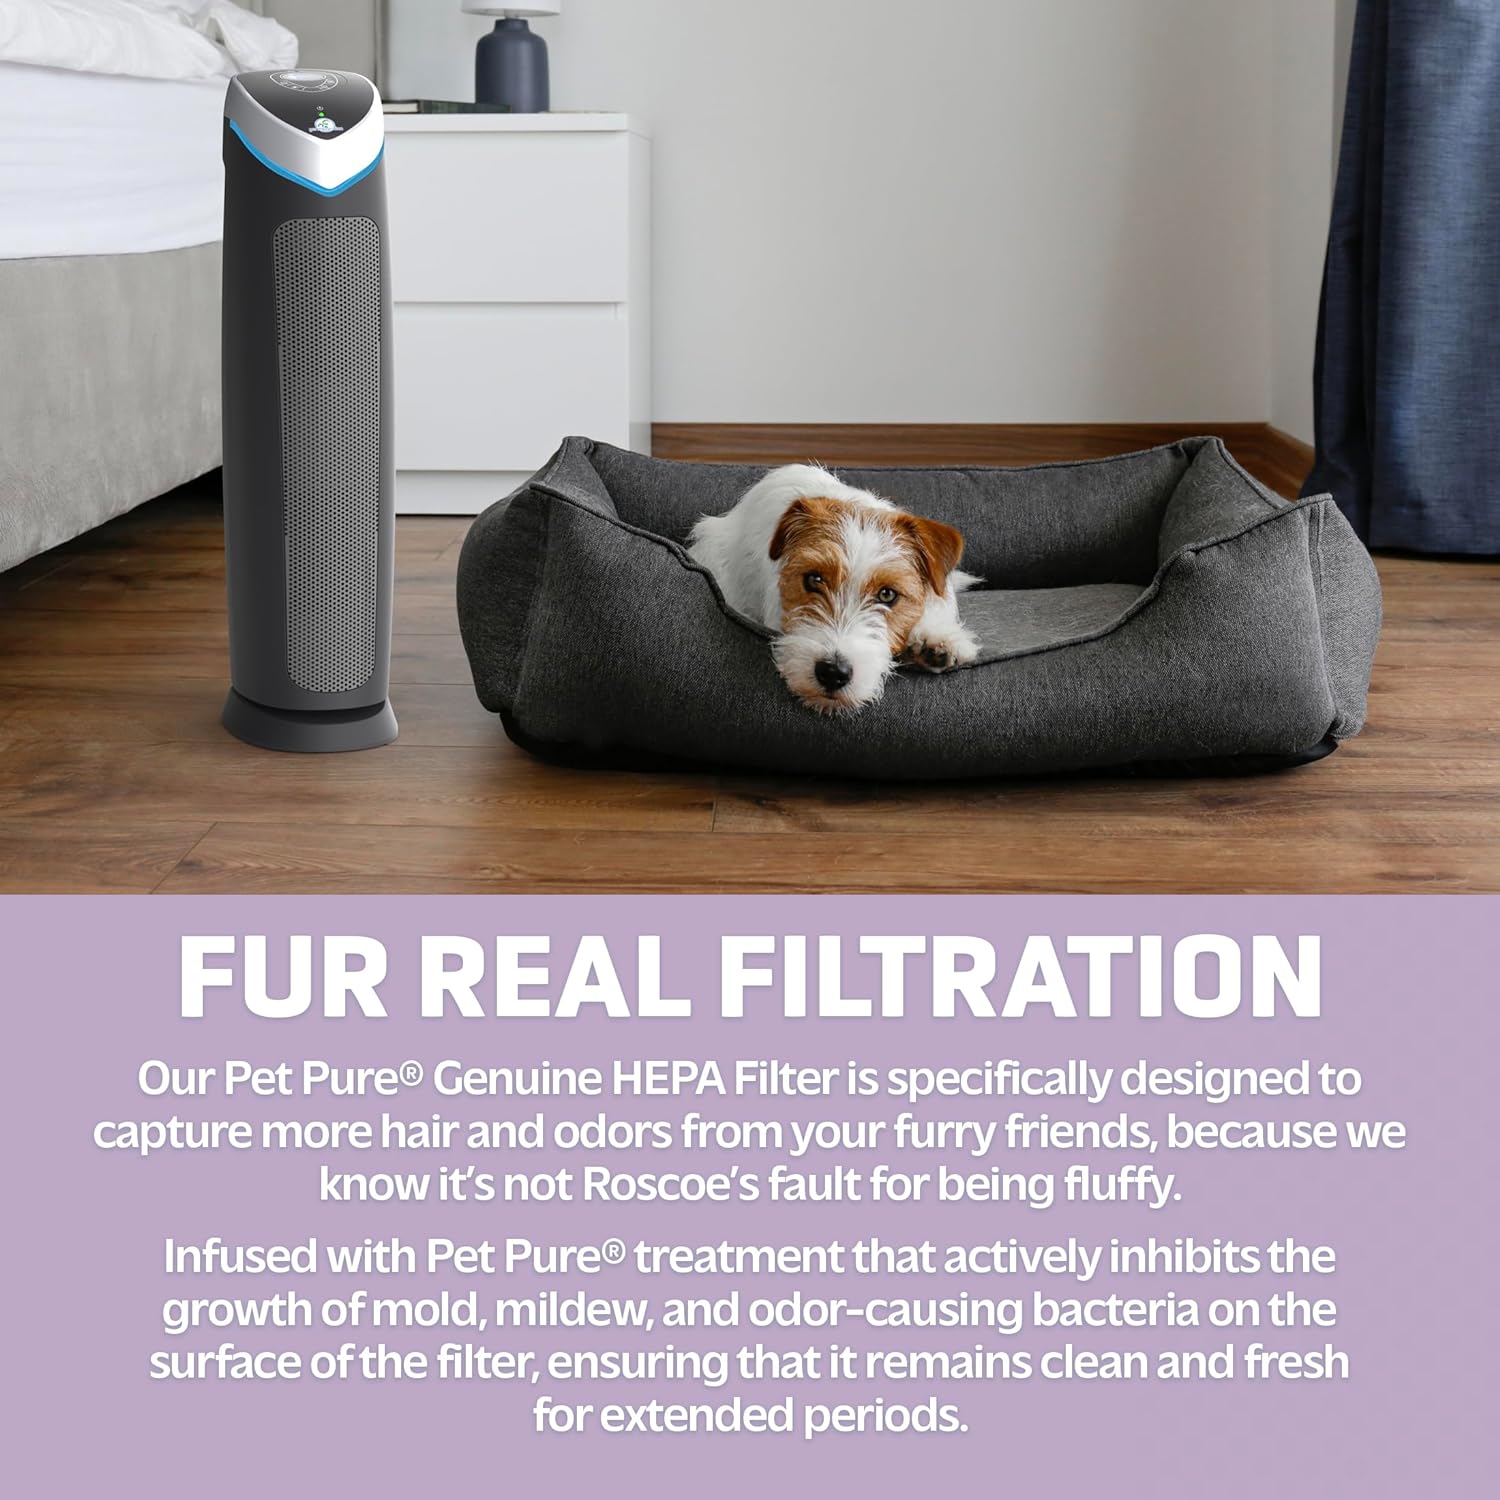 GermGuardian AC5250PT 3-in-1 Air Purifier with Pet Pure True HEPA Filter, UV-C Sanitizer, Captures Allergens, Smoke, Odors, Mold, Dust, Germs, Pets, Smokers, 28-Inch Germ Guardian Air Purifier